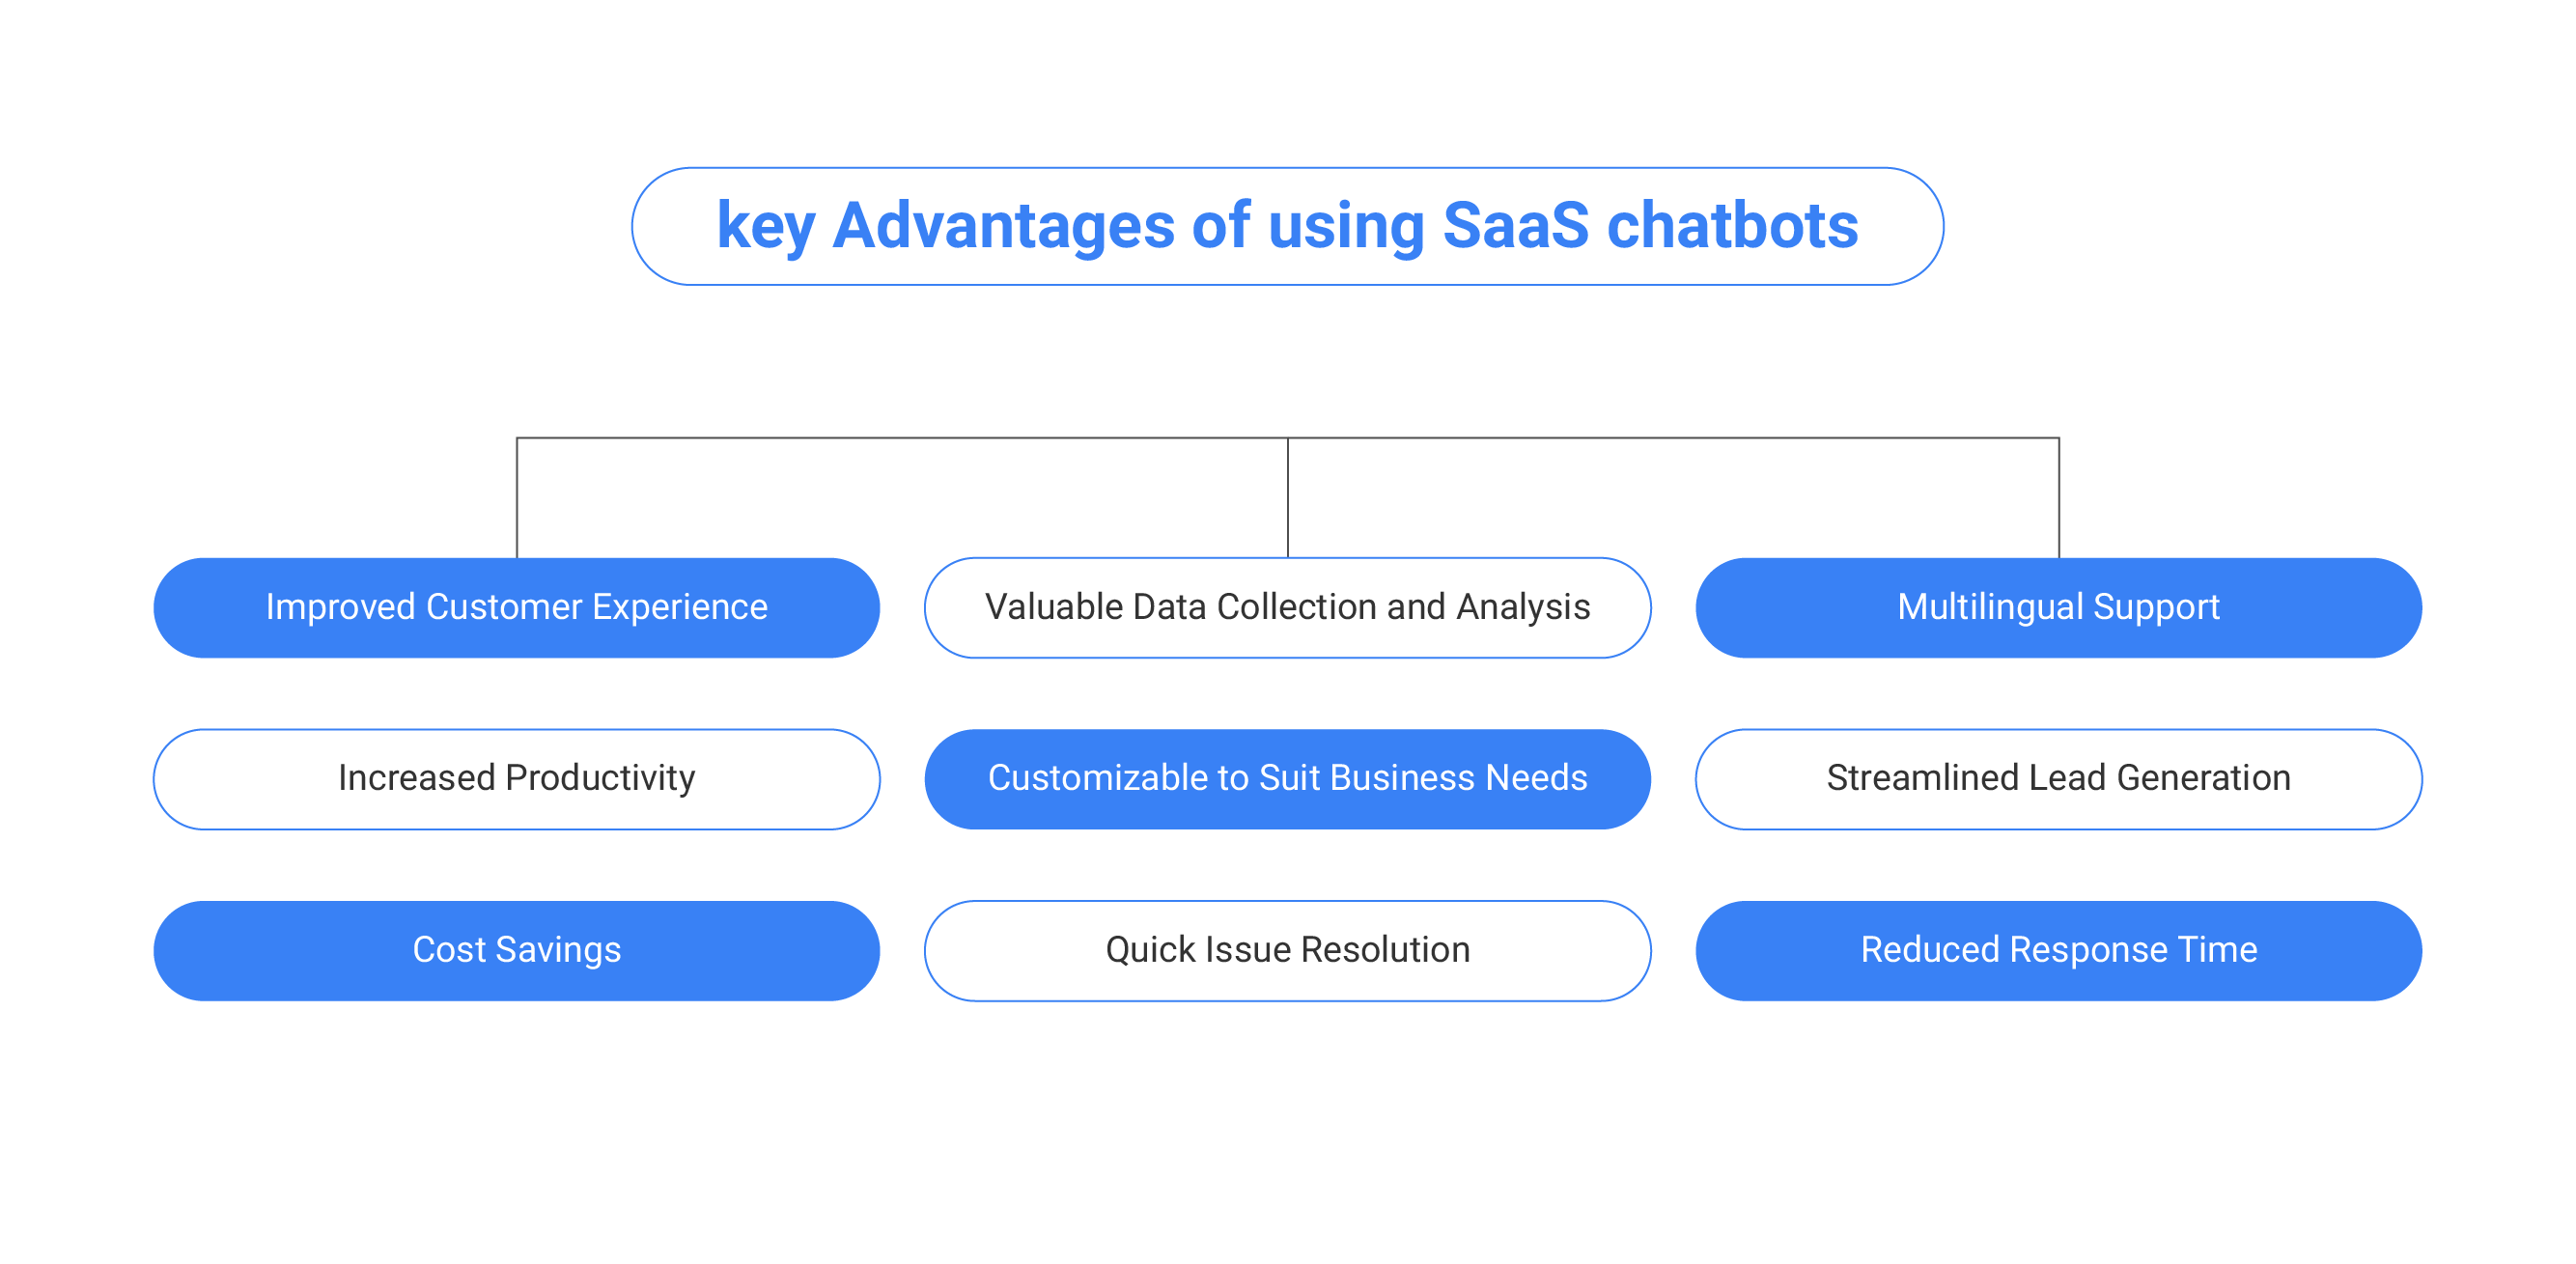 Why use SaaS Chatbots?